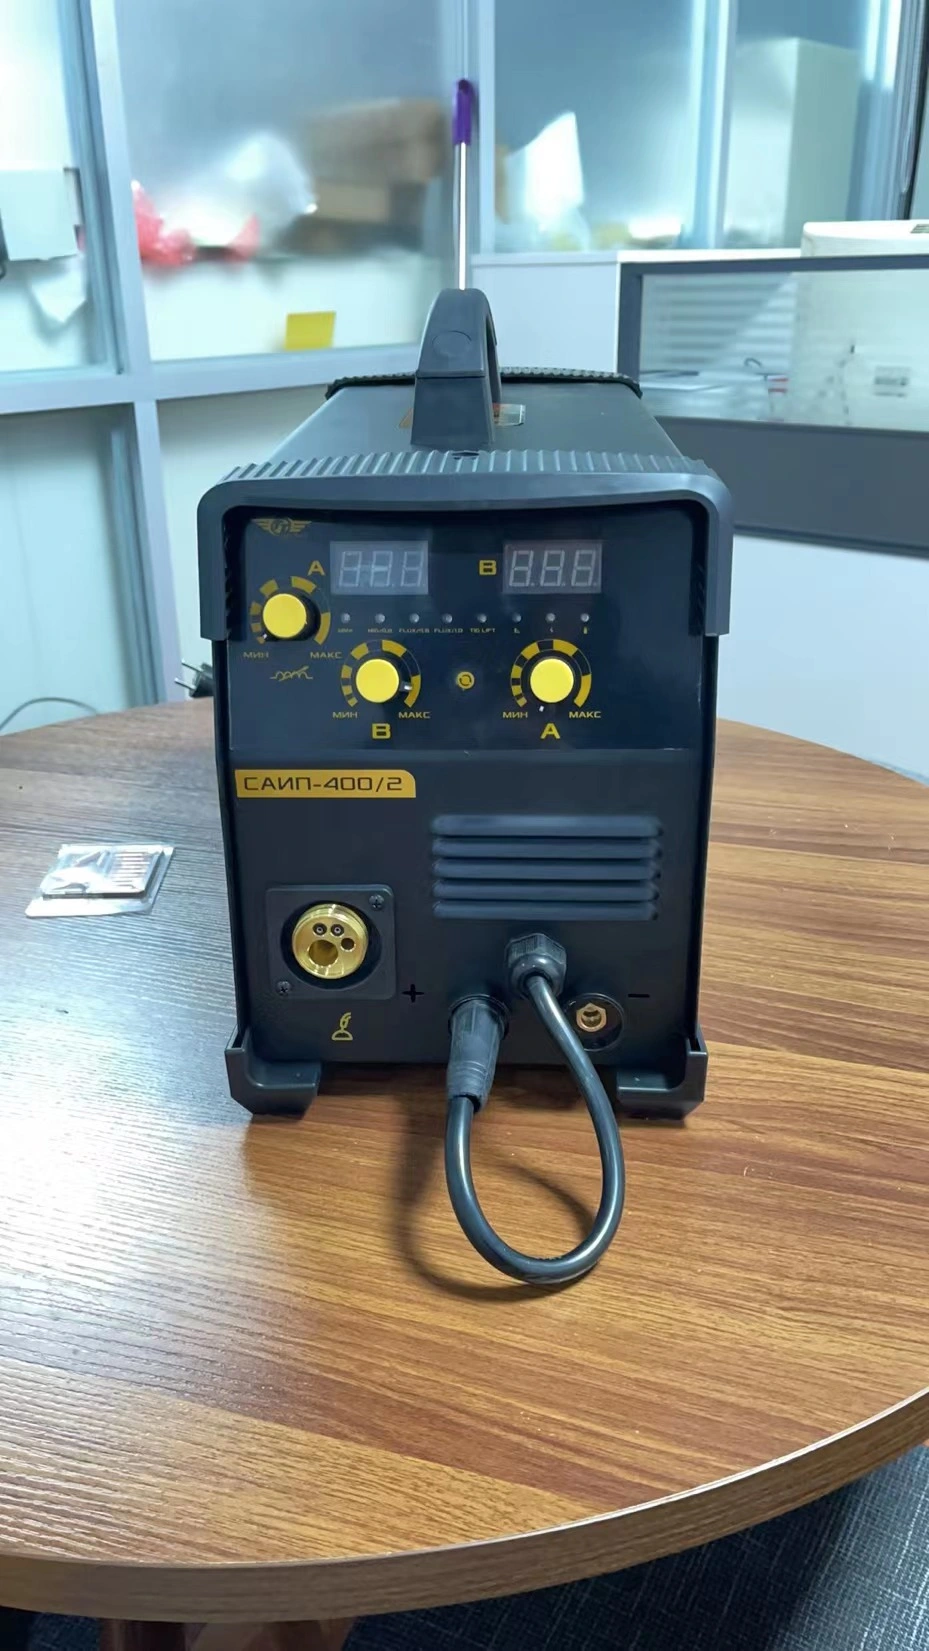 Quality Guaranteed 160A 230V Welding Machine Welding Different Types of Materials Welding Machine